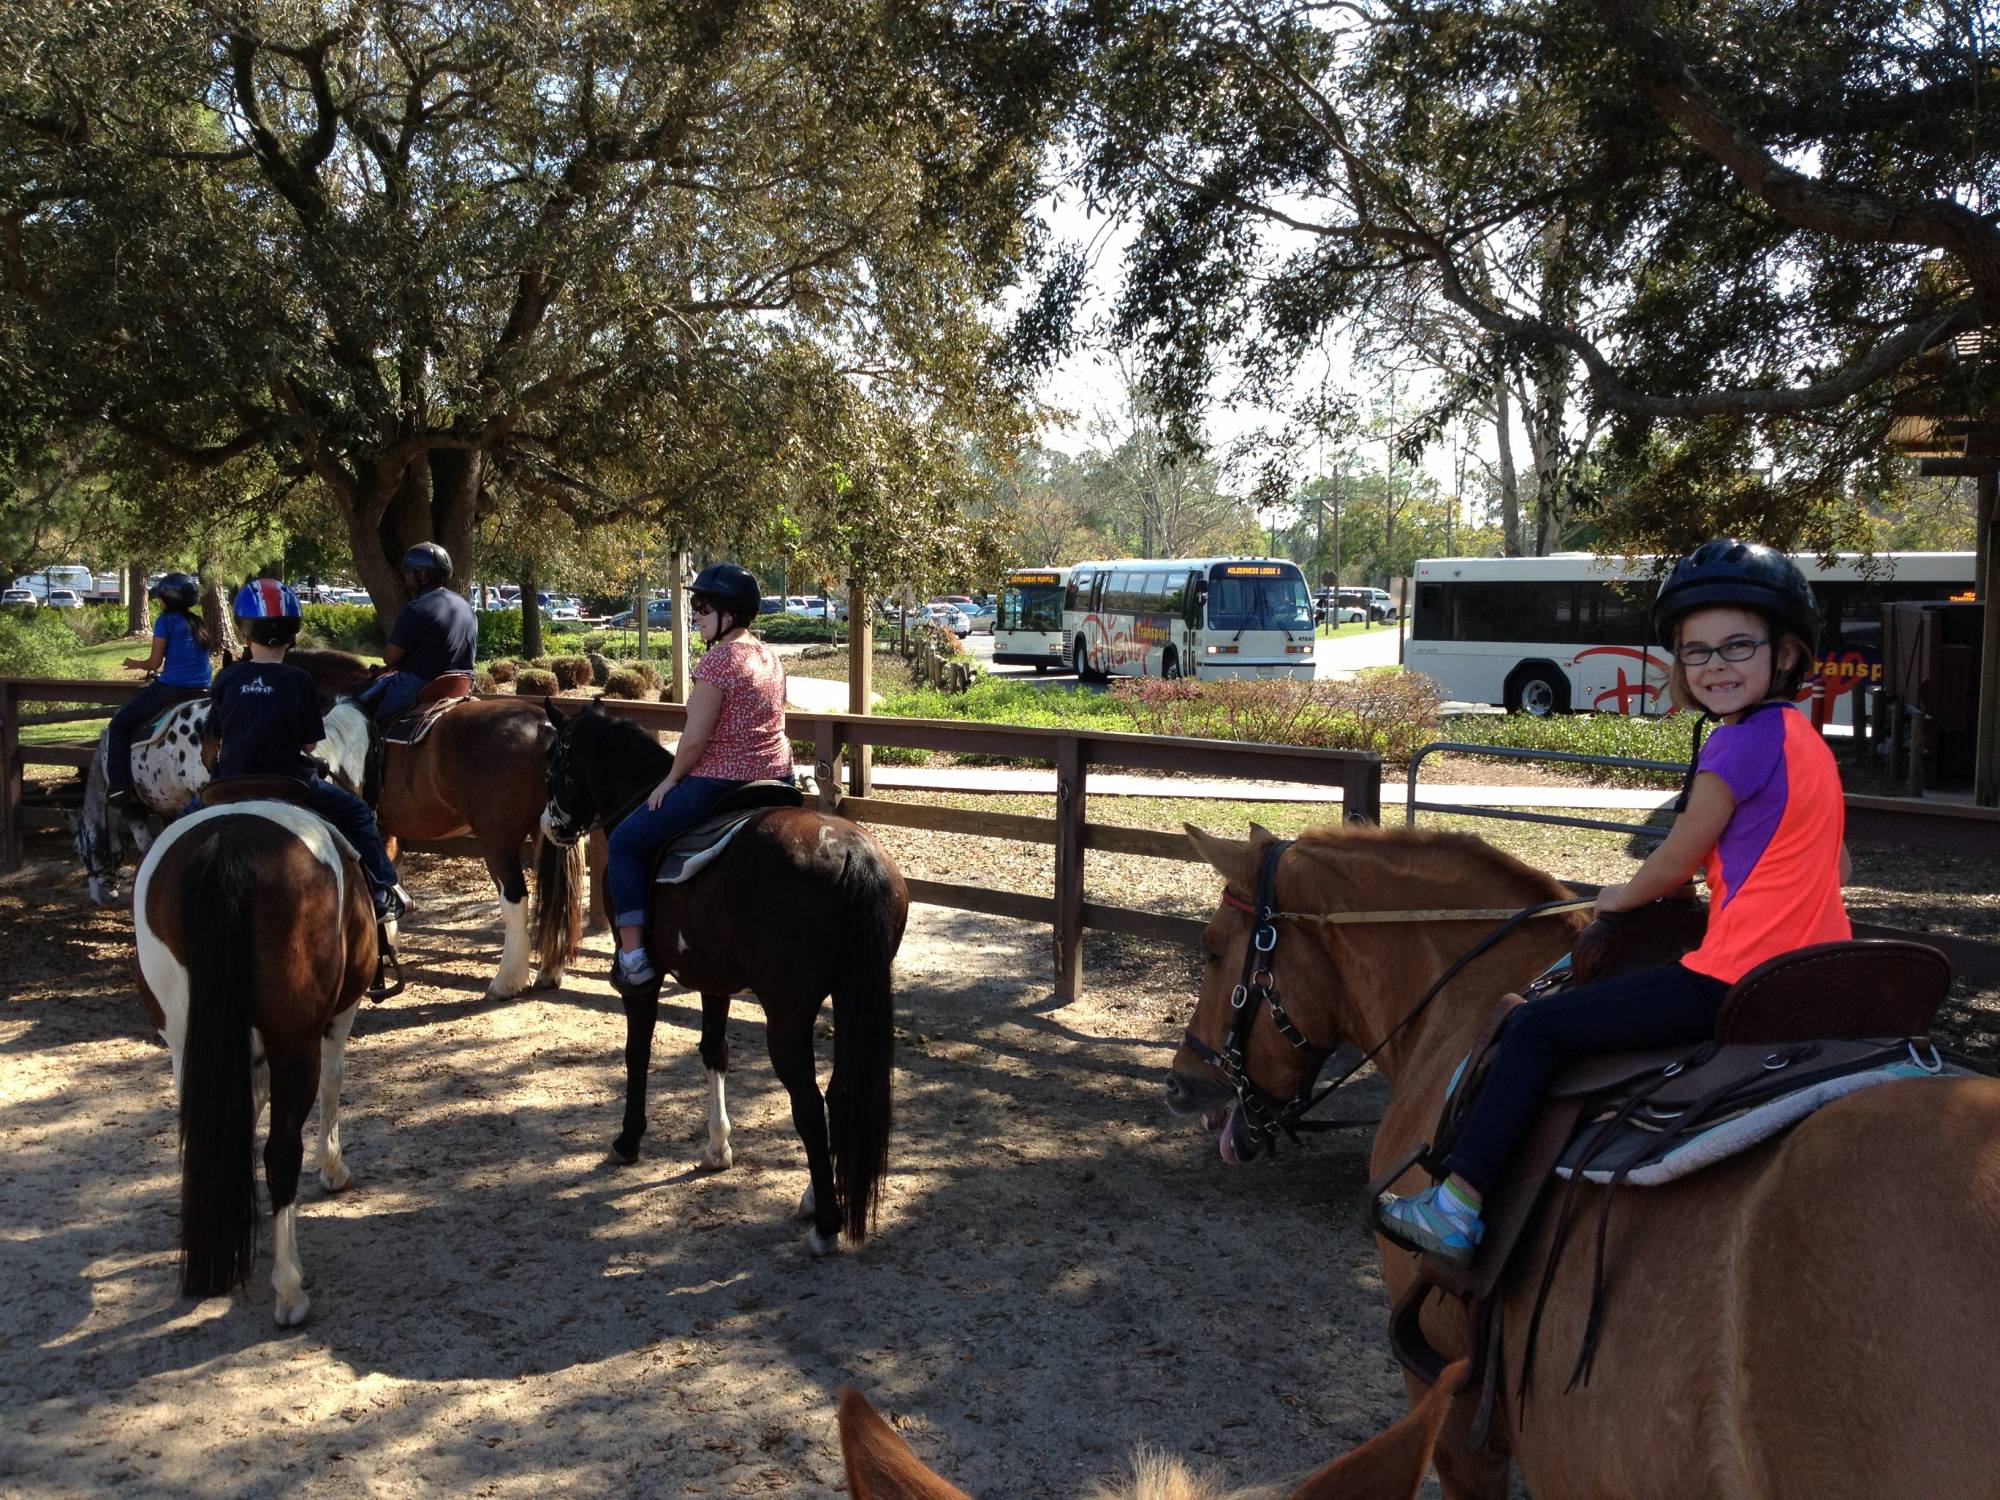 Explore Fort Wilderness from Horse-back with a Trail Ride | PassPorter.com